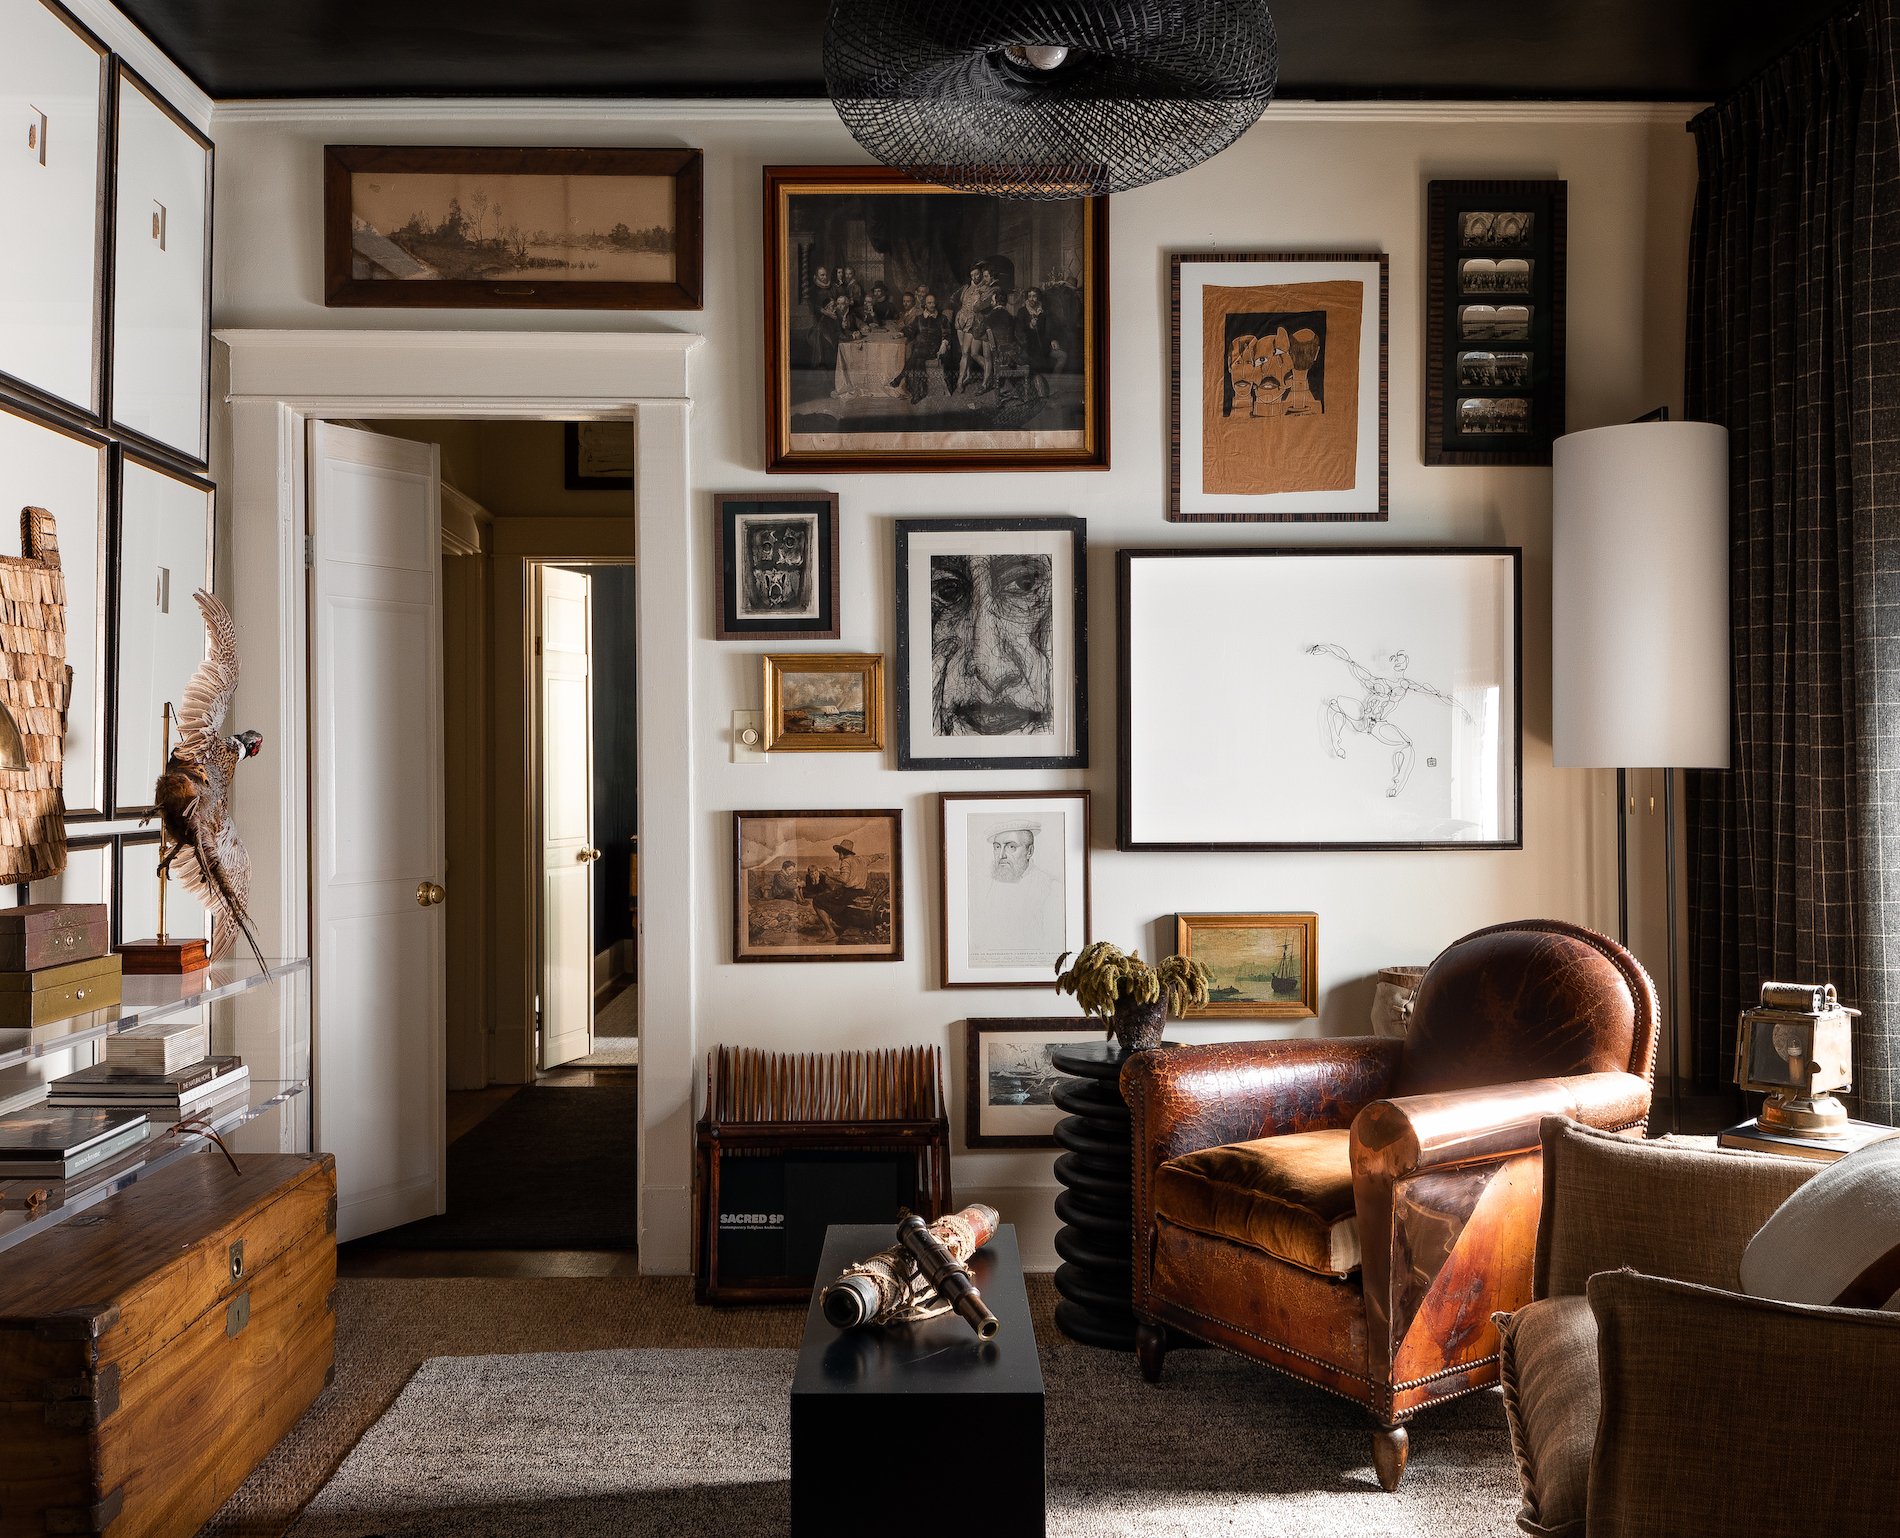 Antique and vintage  art objects, furniture and artworks create a warm space of considerable depth in interior designer Sean Anderson's Highland project in Tennessee (Photo: Haris Kenjar)